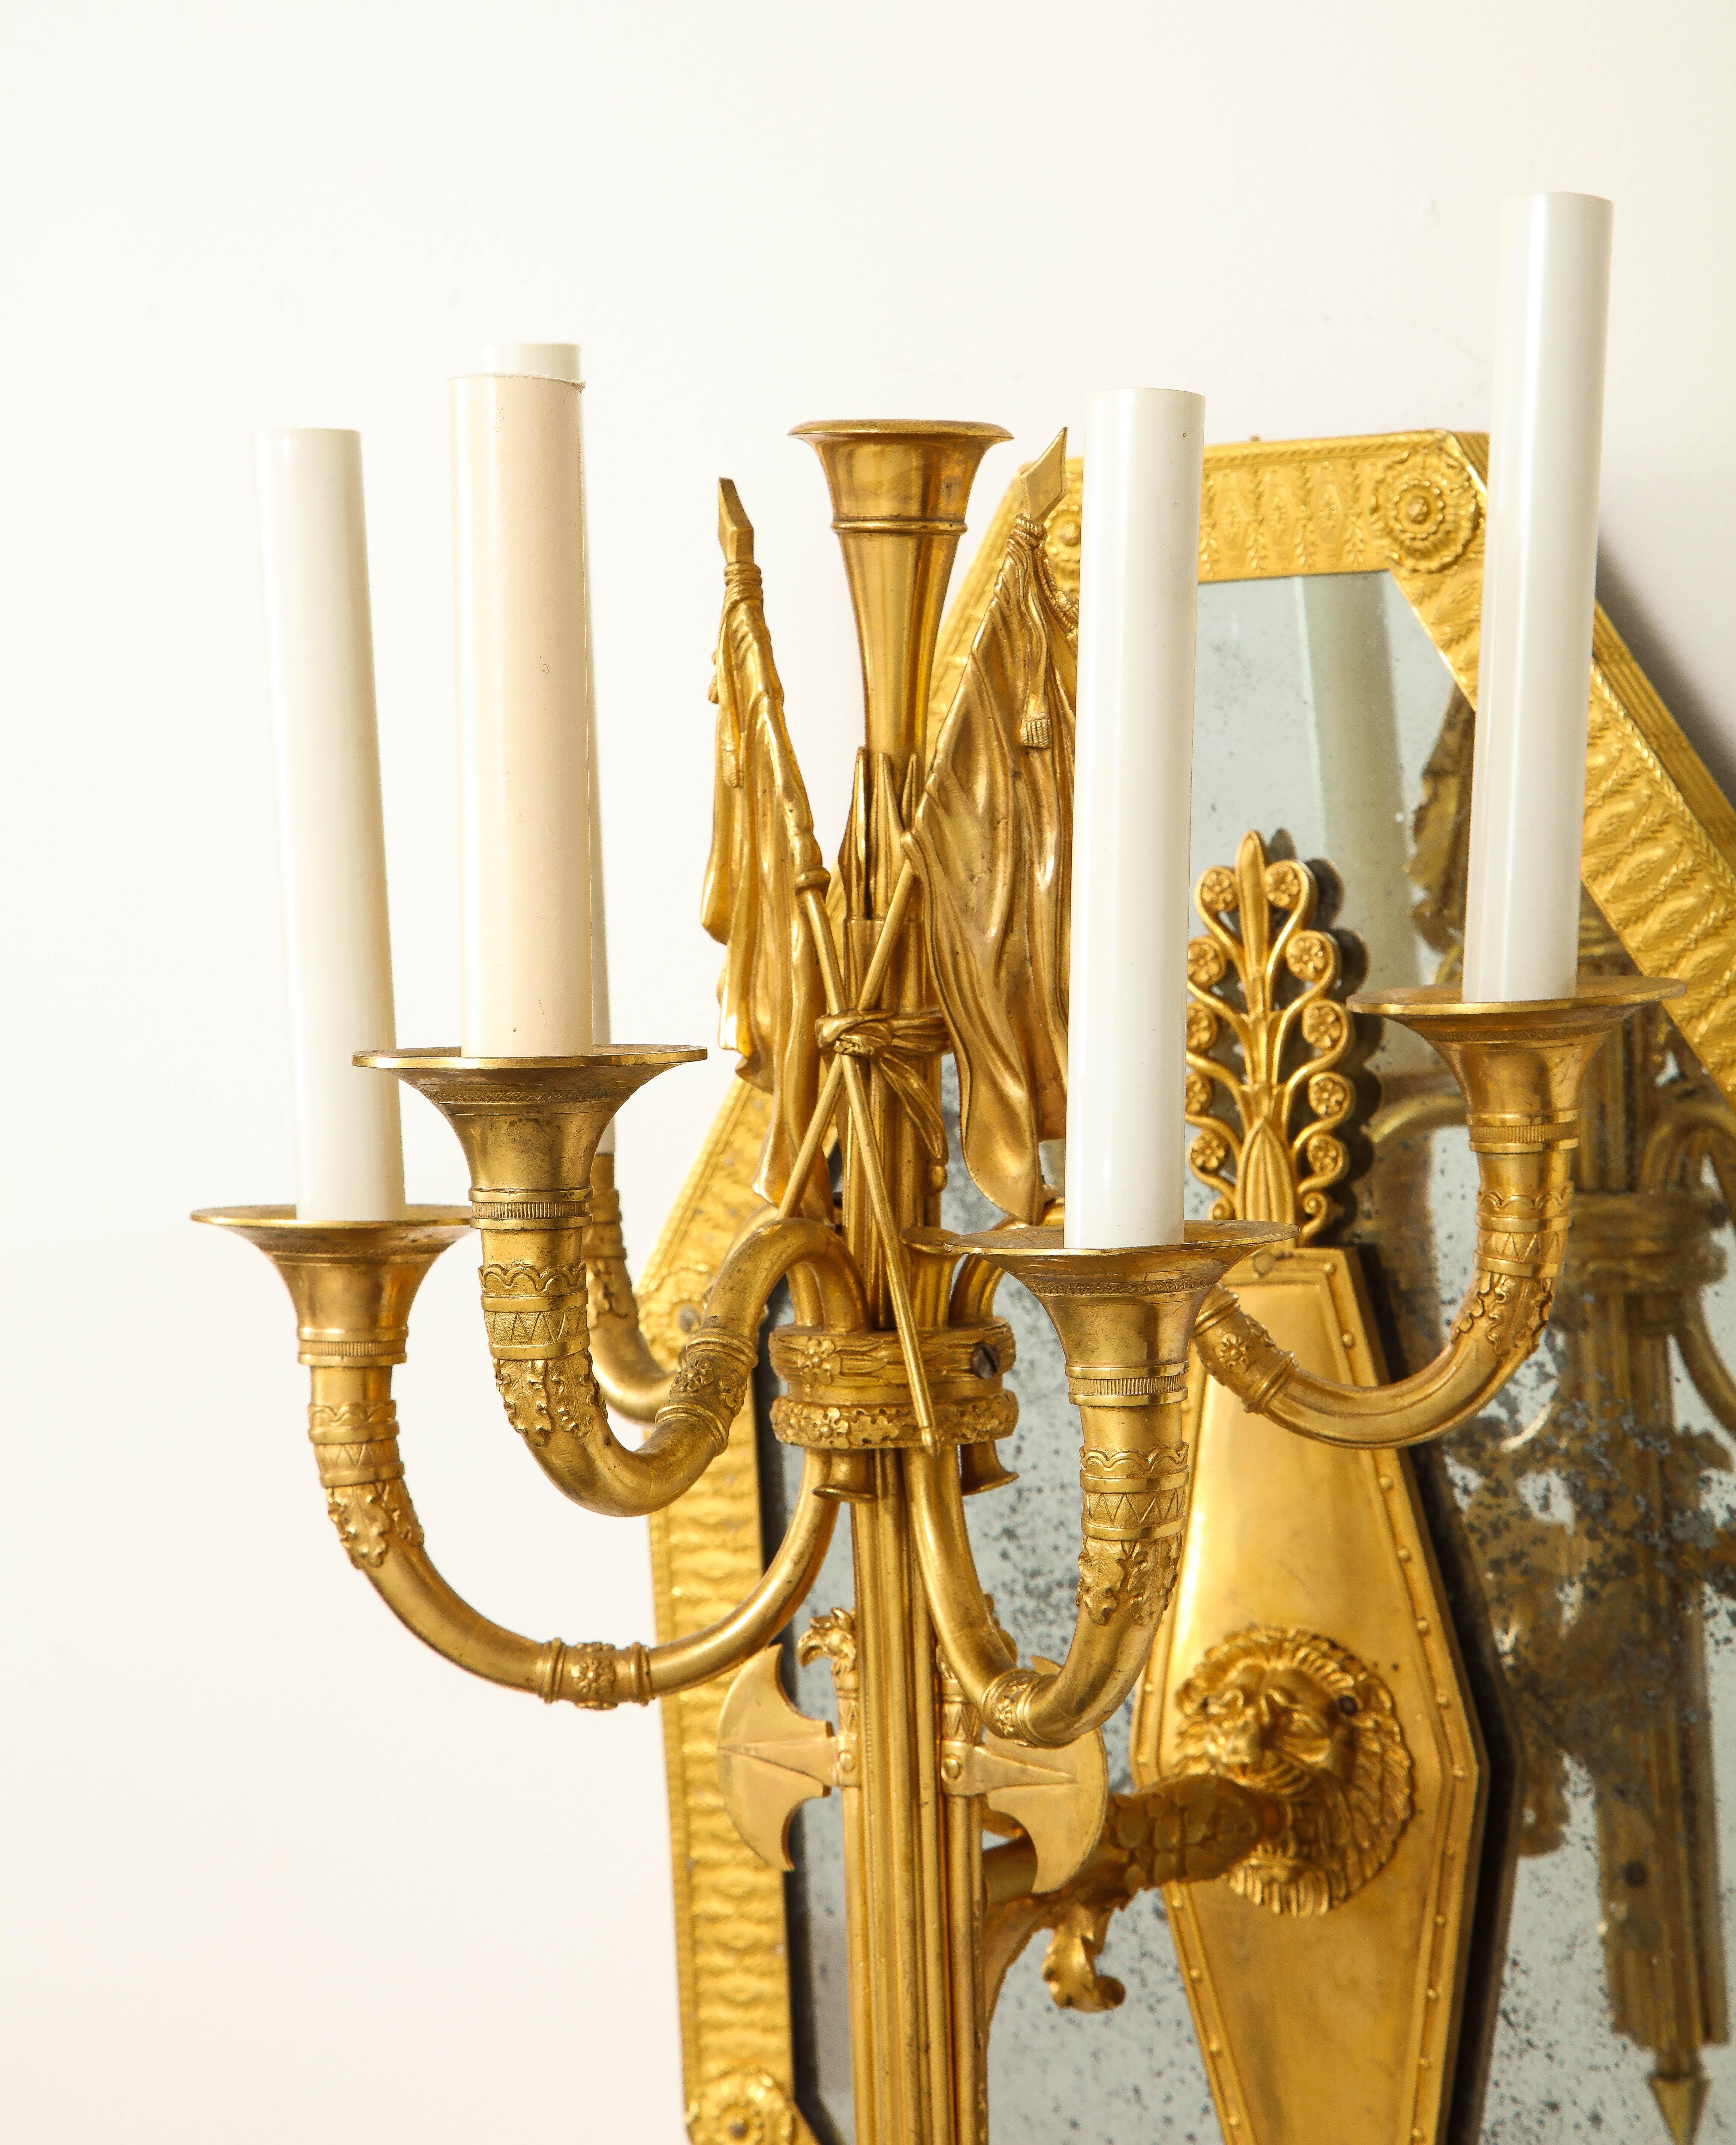 Pair of French 1st Empire Dore Bronze Mtd. 5-Arm Mirrored Sconces, Att. Thomire For Sale 14